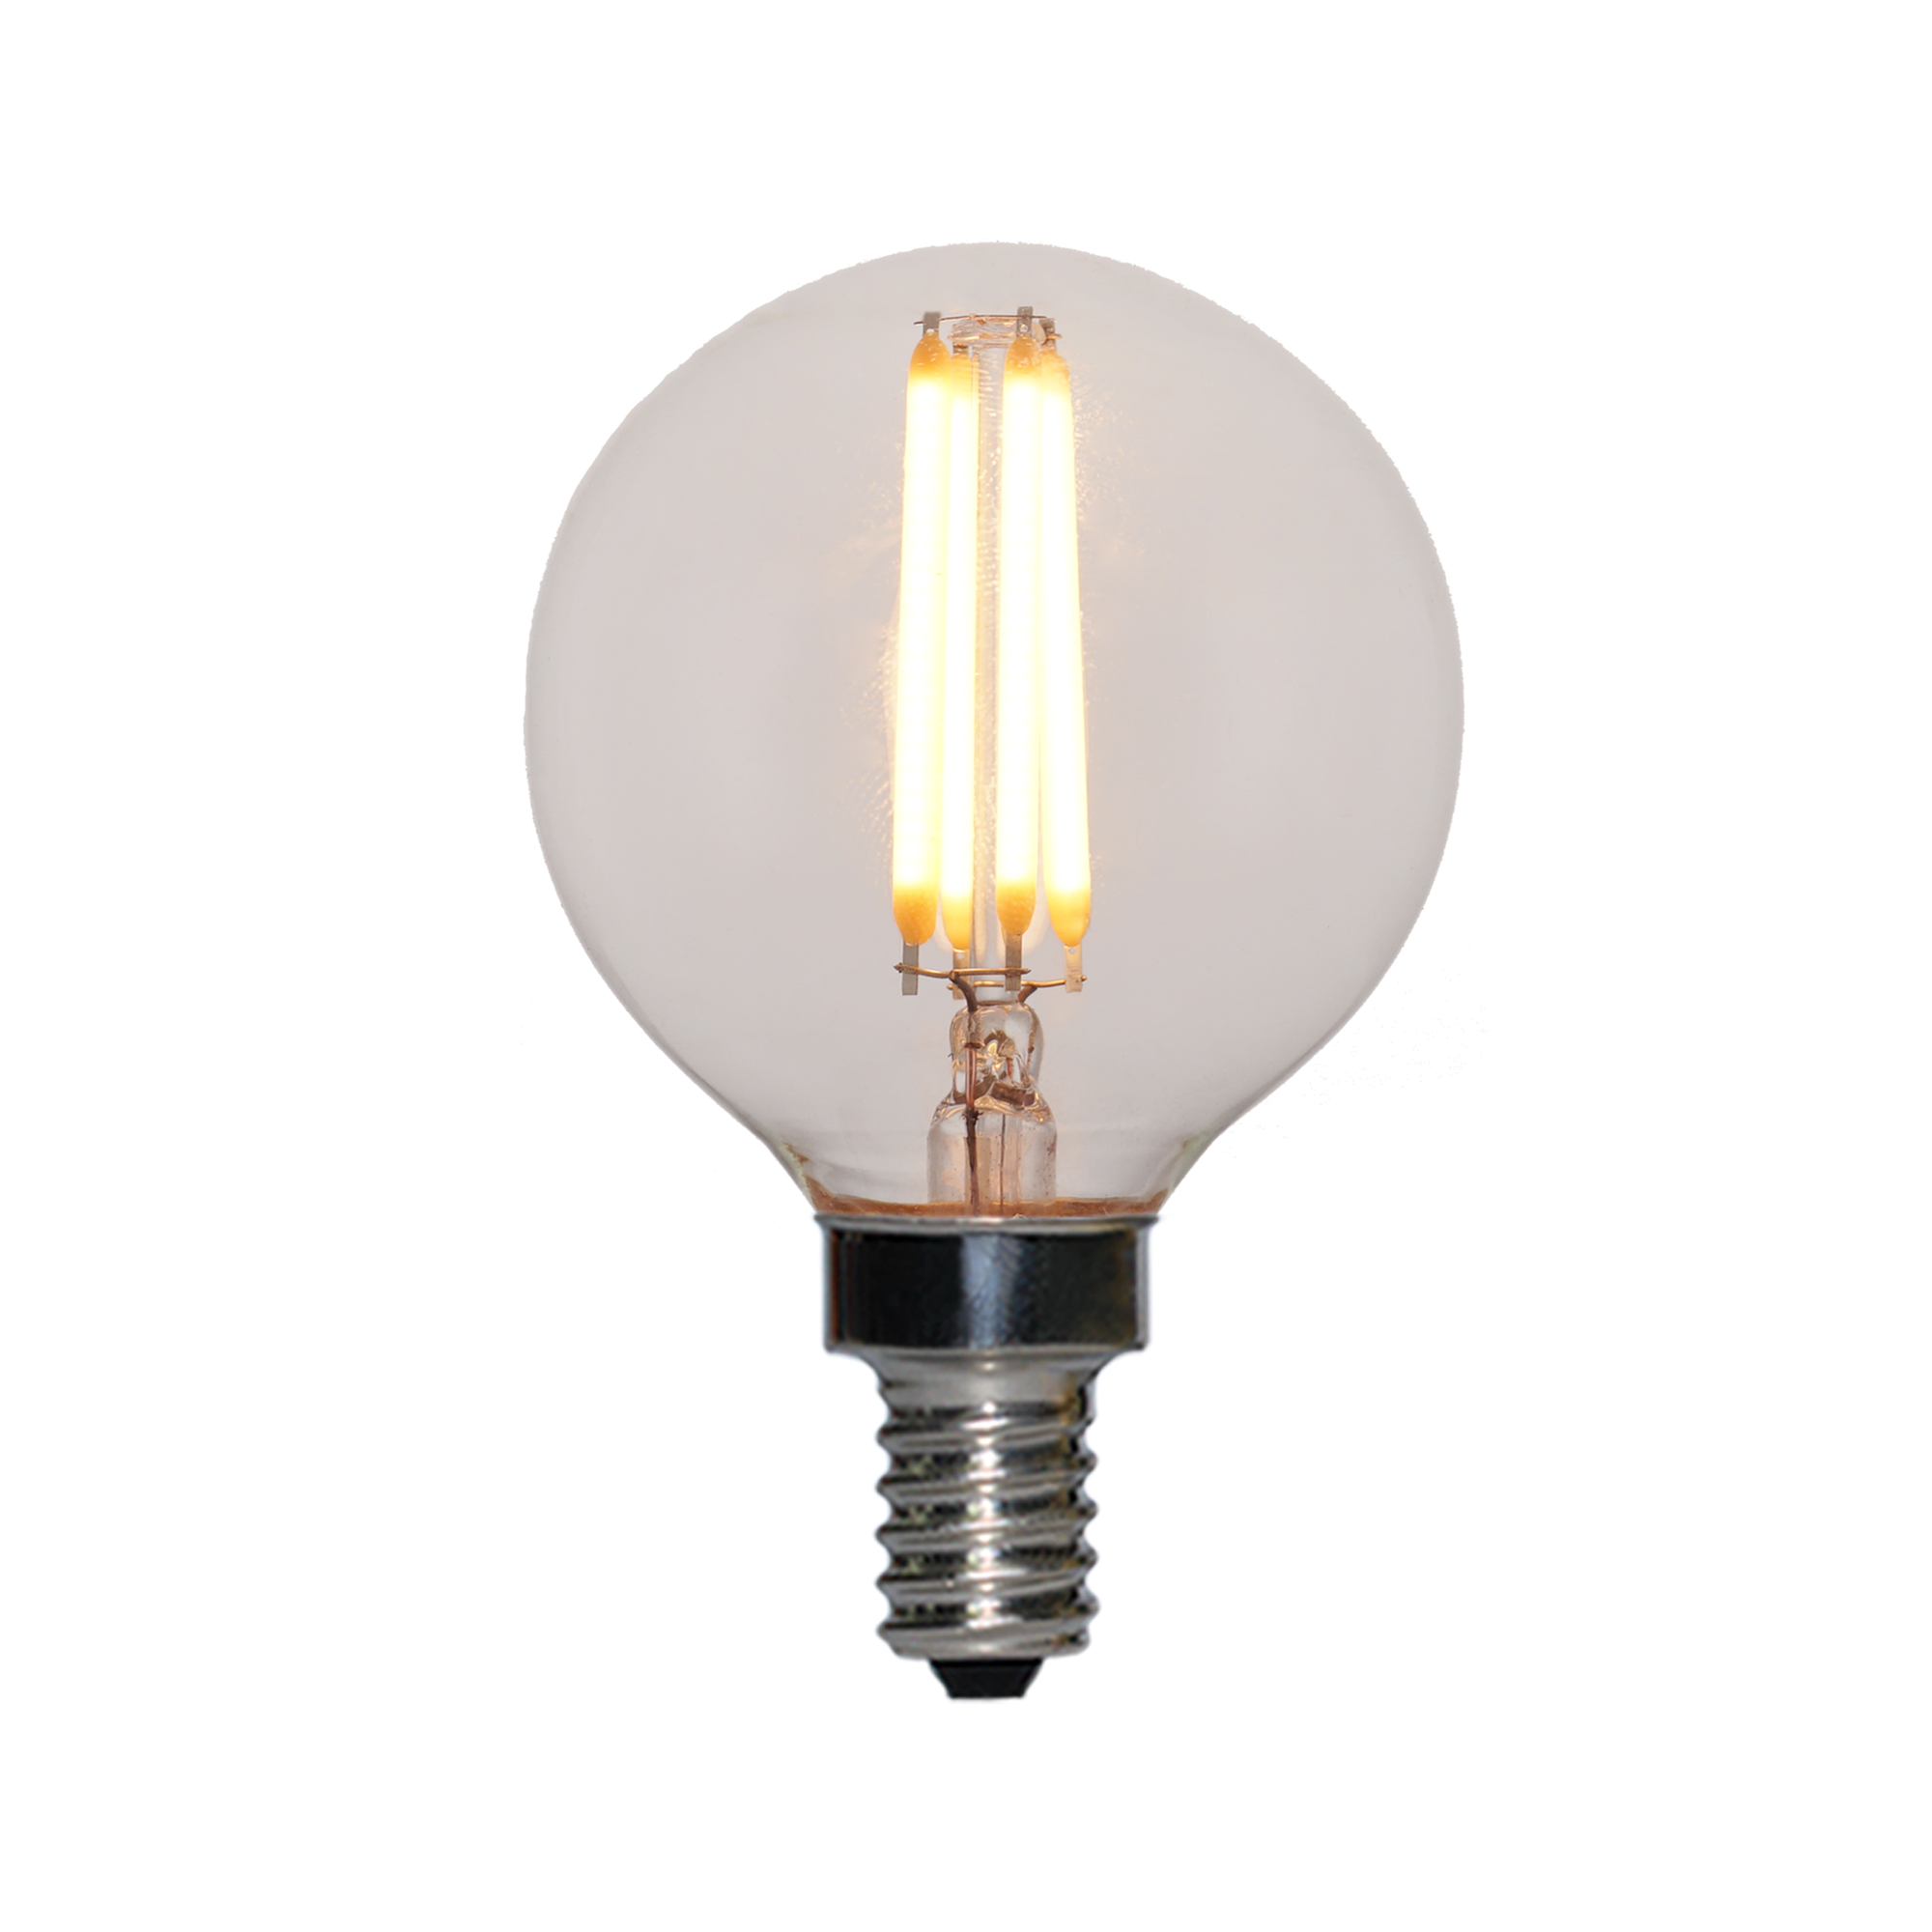 Chinese wholesale Filament Light Bulbs -
 UL ES title 20, Title 24 and JA8 Certified  listed led Edison bulbs G16.5 A19 S19 S21 G25 G30 G40  – Omita